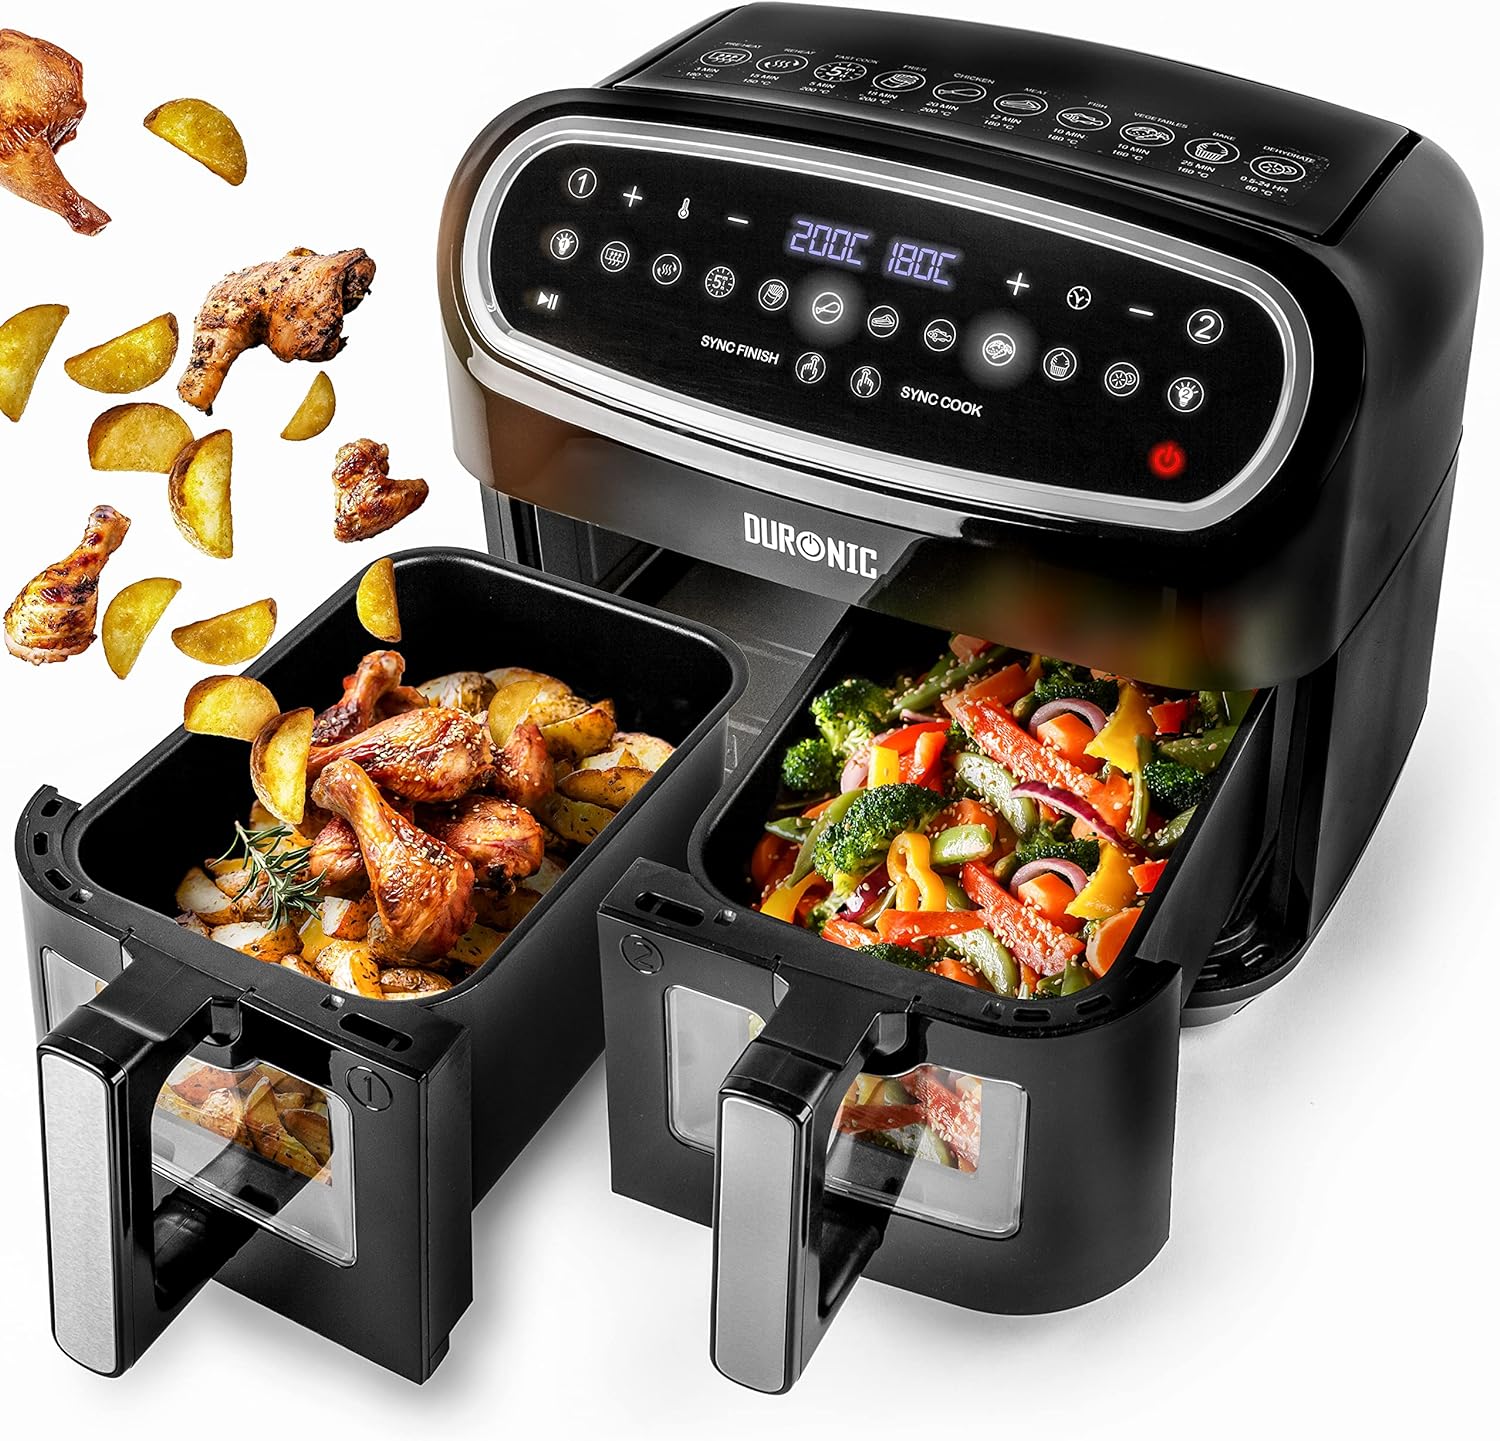 You are currently viewing Duronic Air Fryer AF24 Review